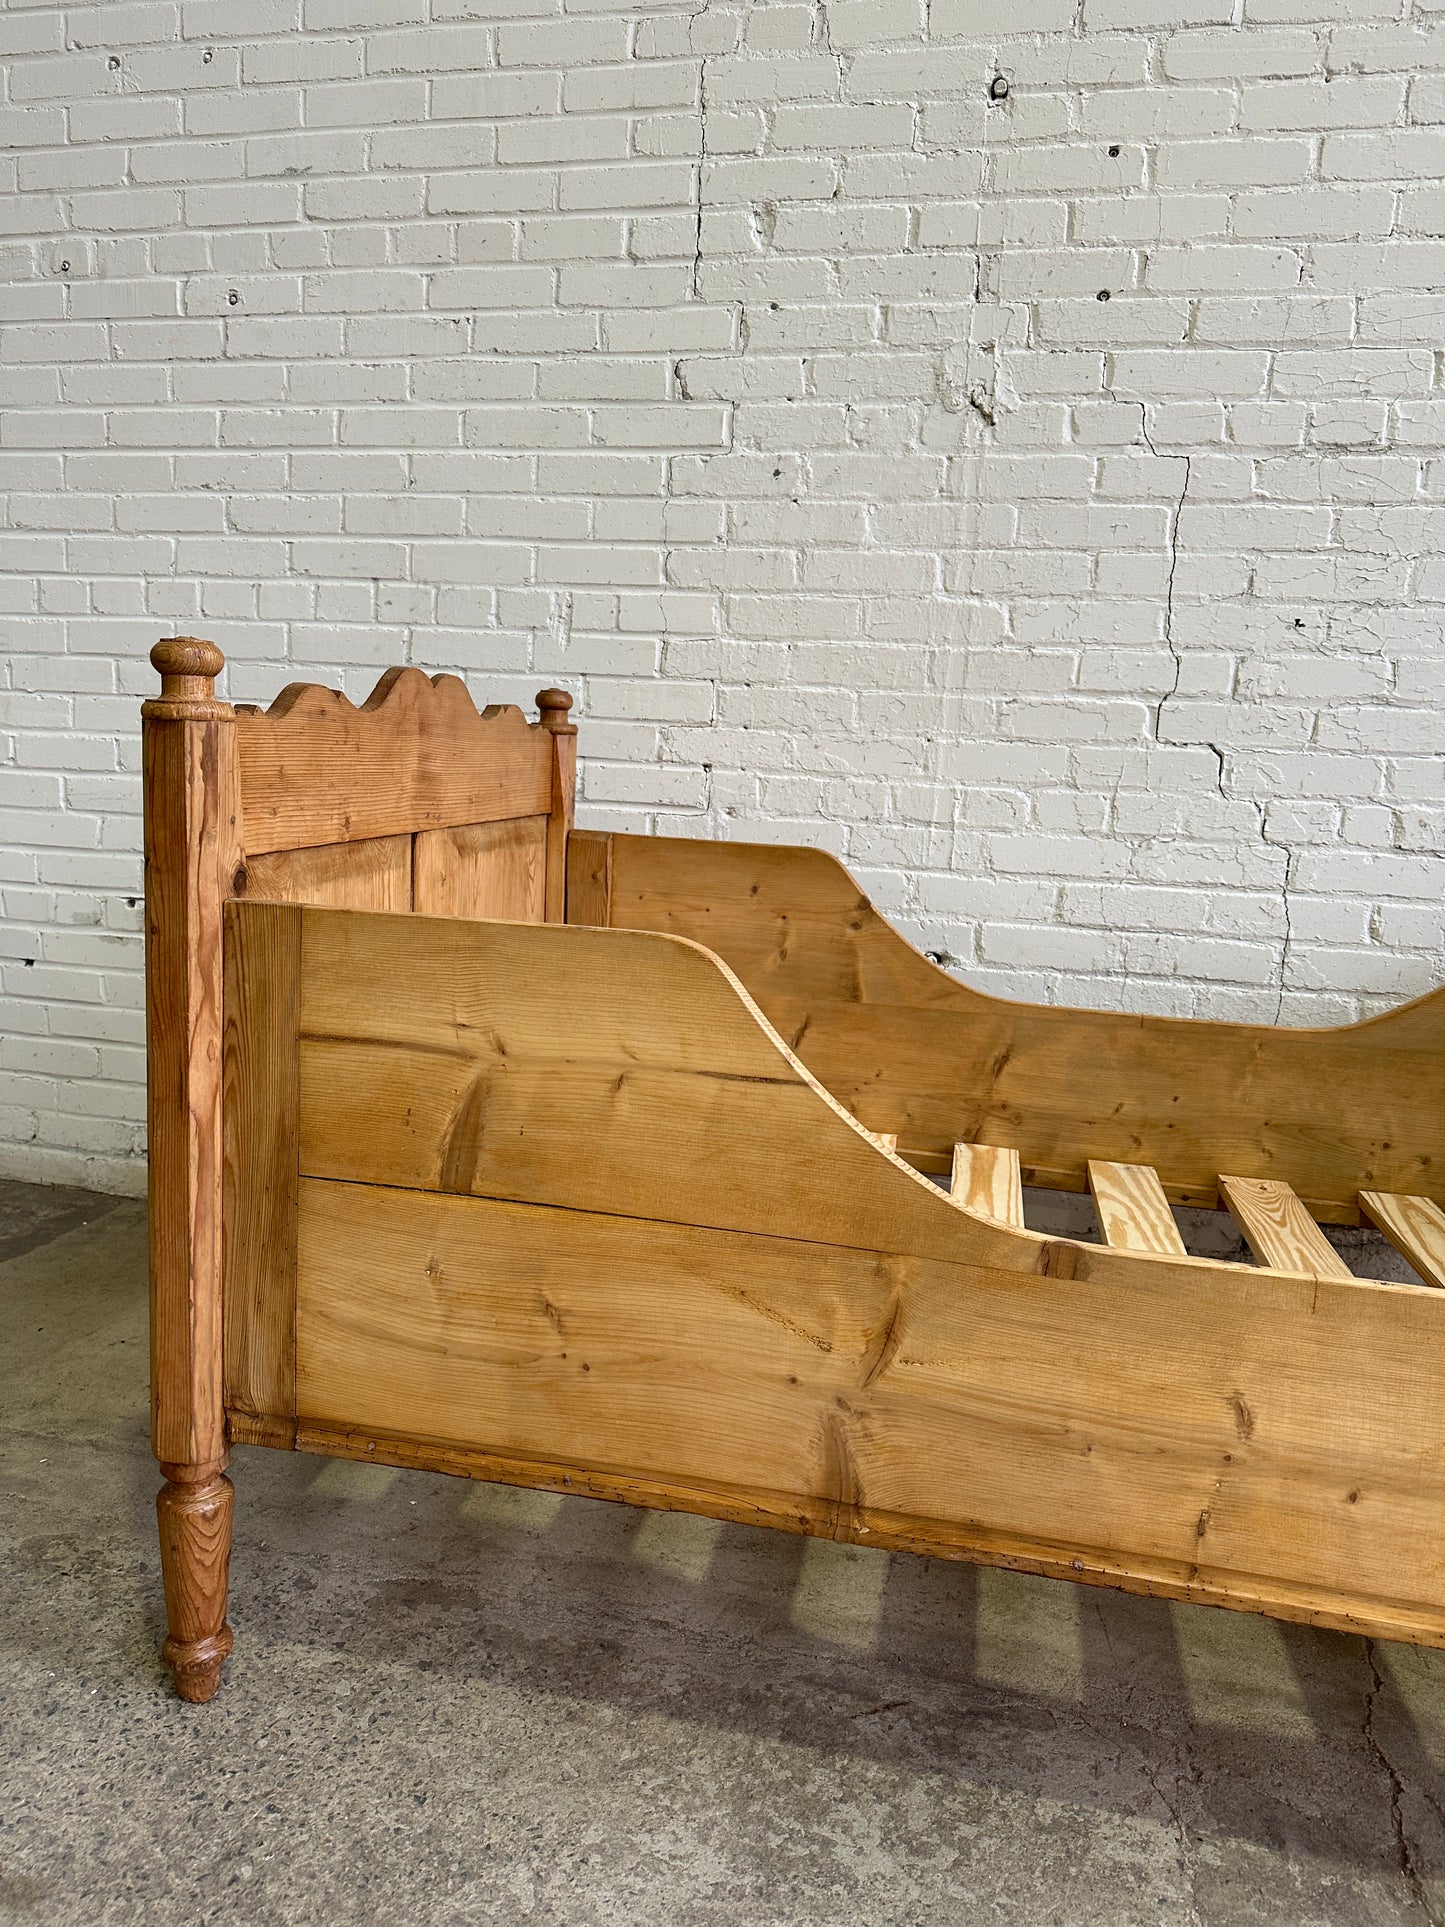 Antique Pine Sleigh Bed with Deep Side Rails c. 1890